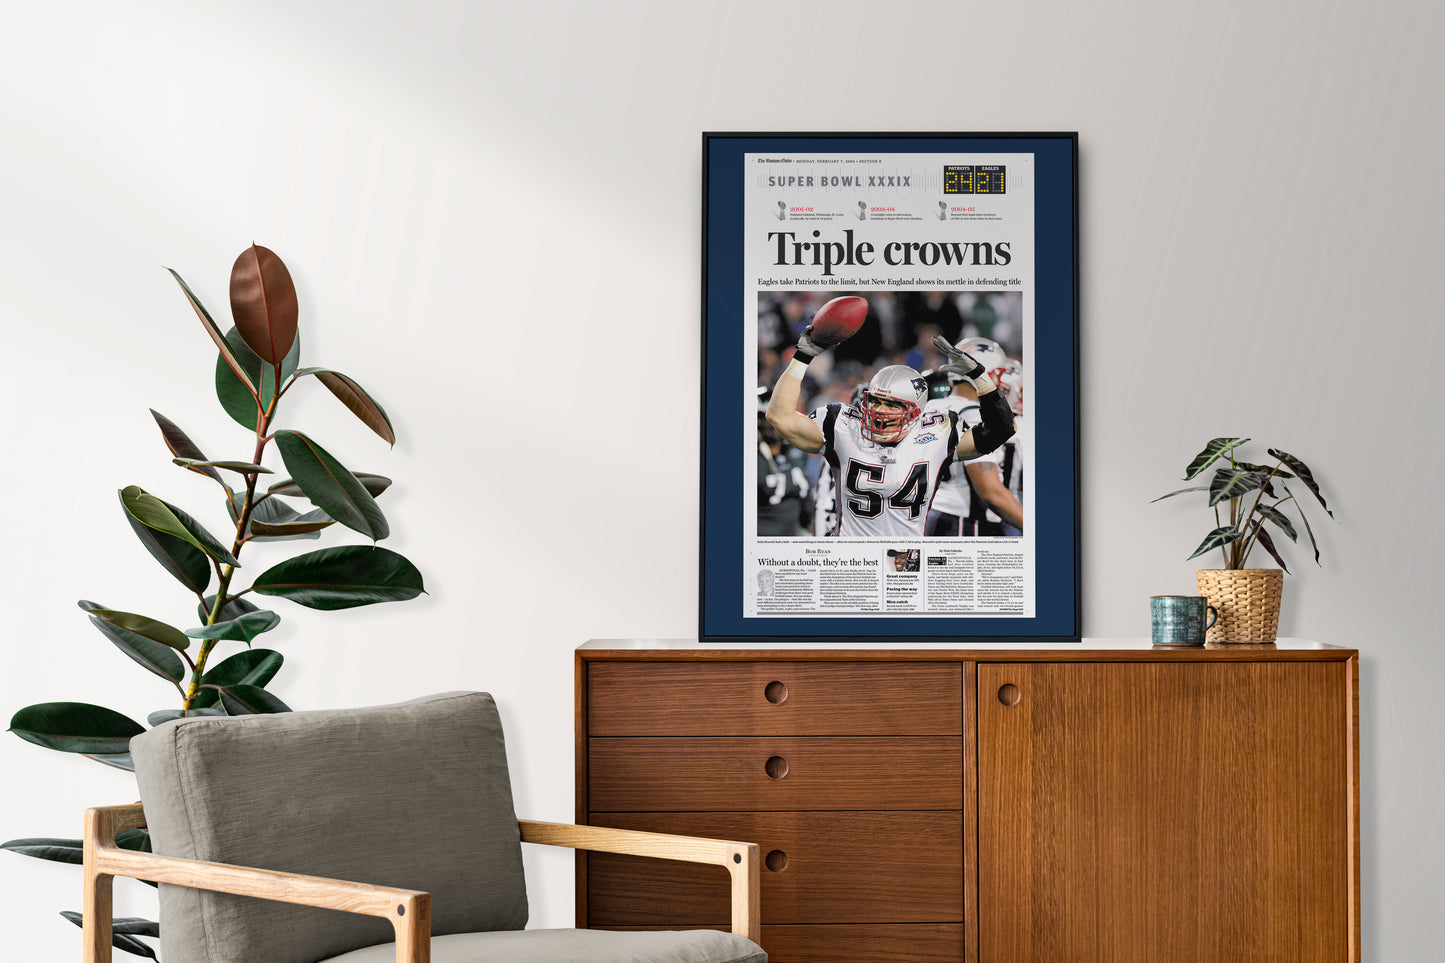 New England Patriots 2005 Super Bowl NFL Champions Front Cover The Boston Globe Newspaper Poster